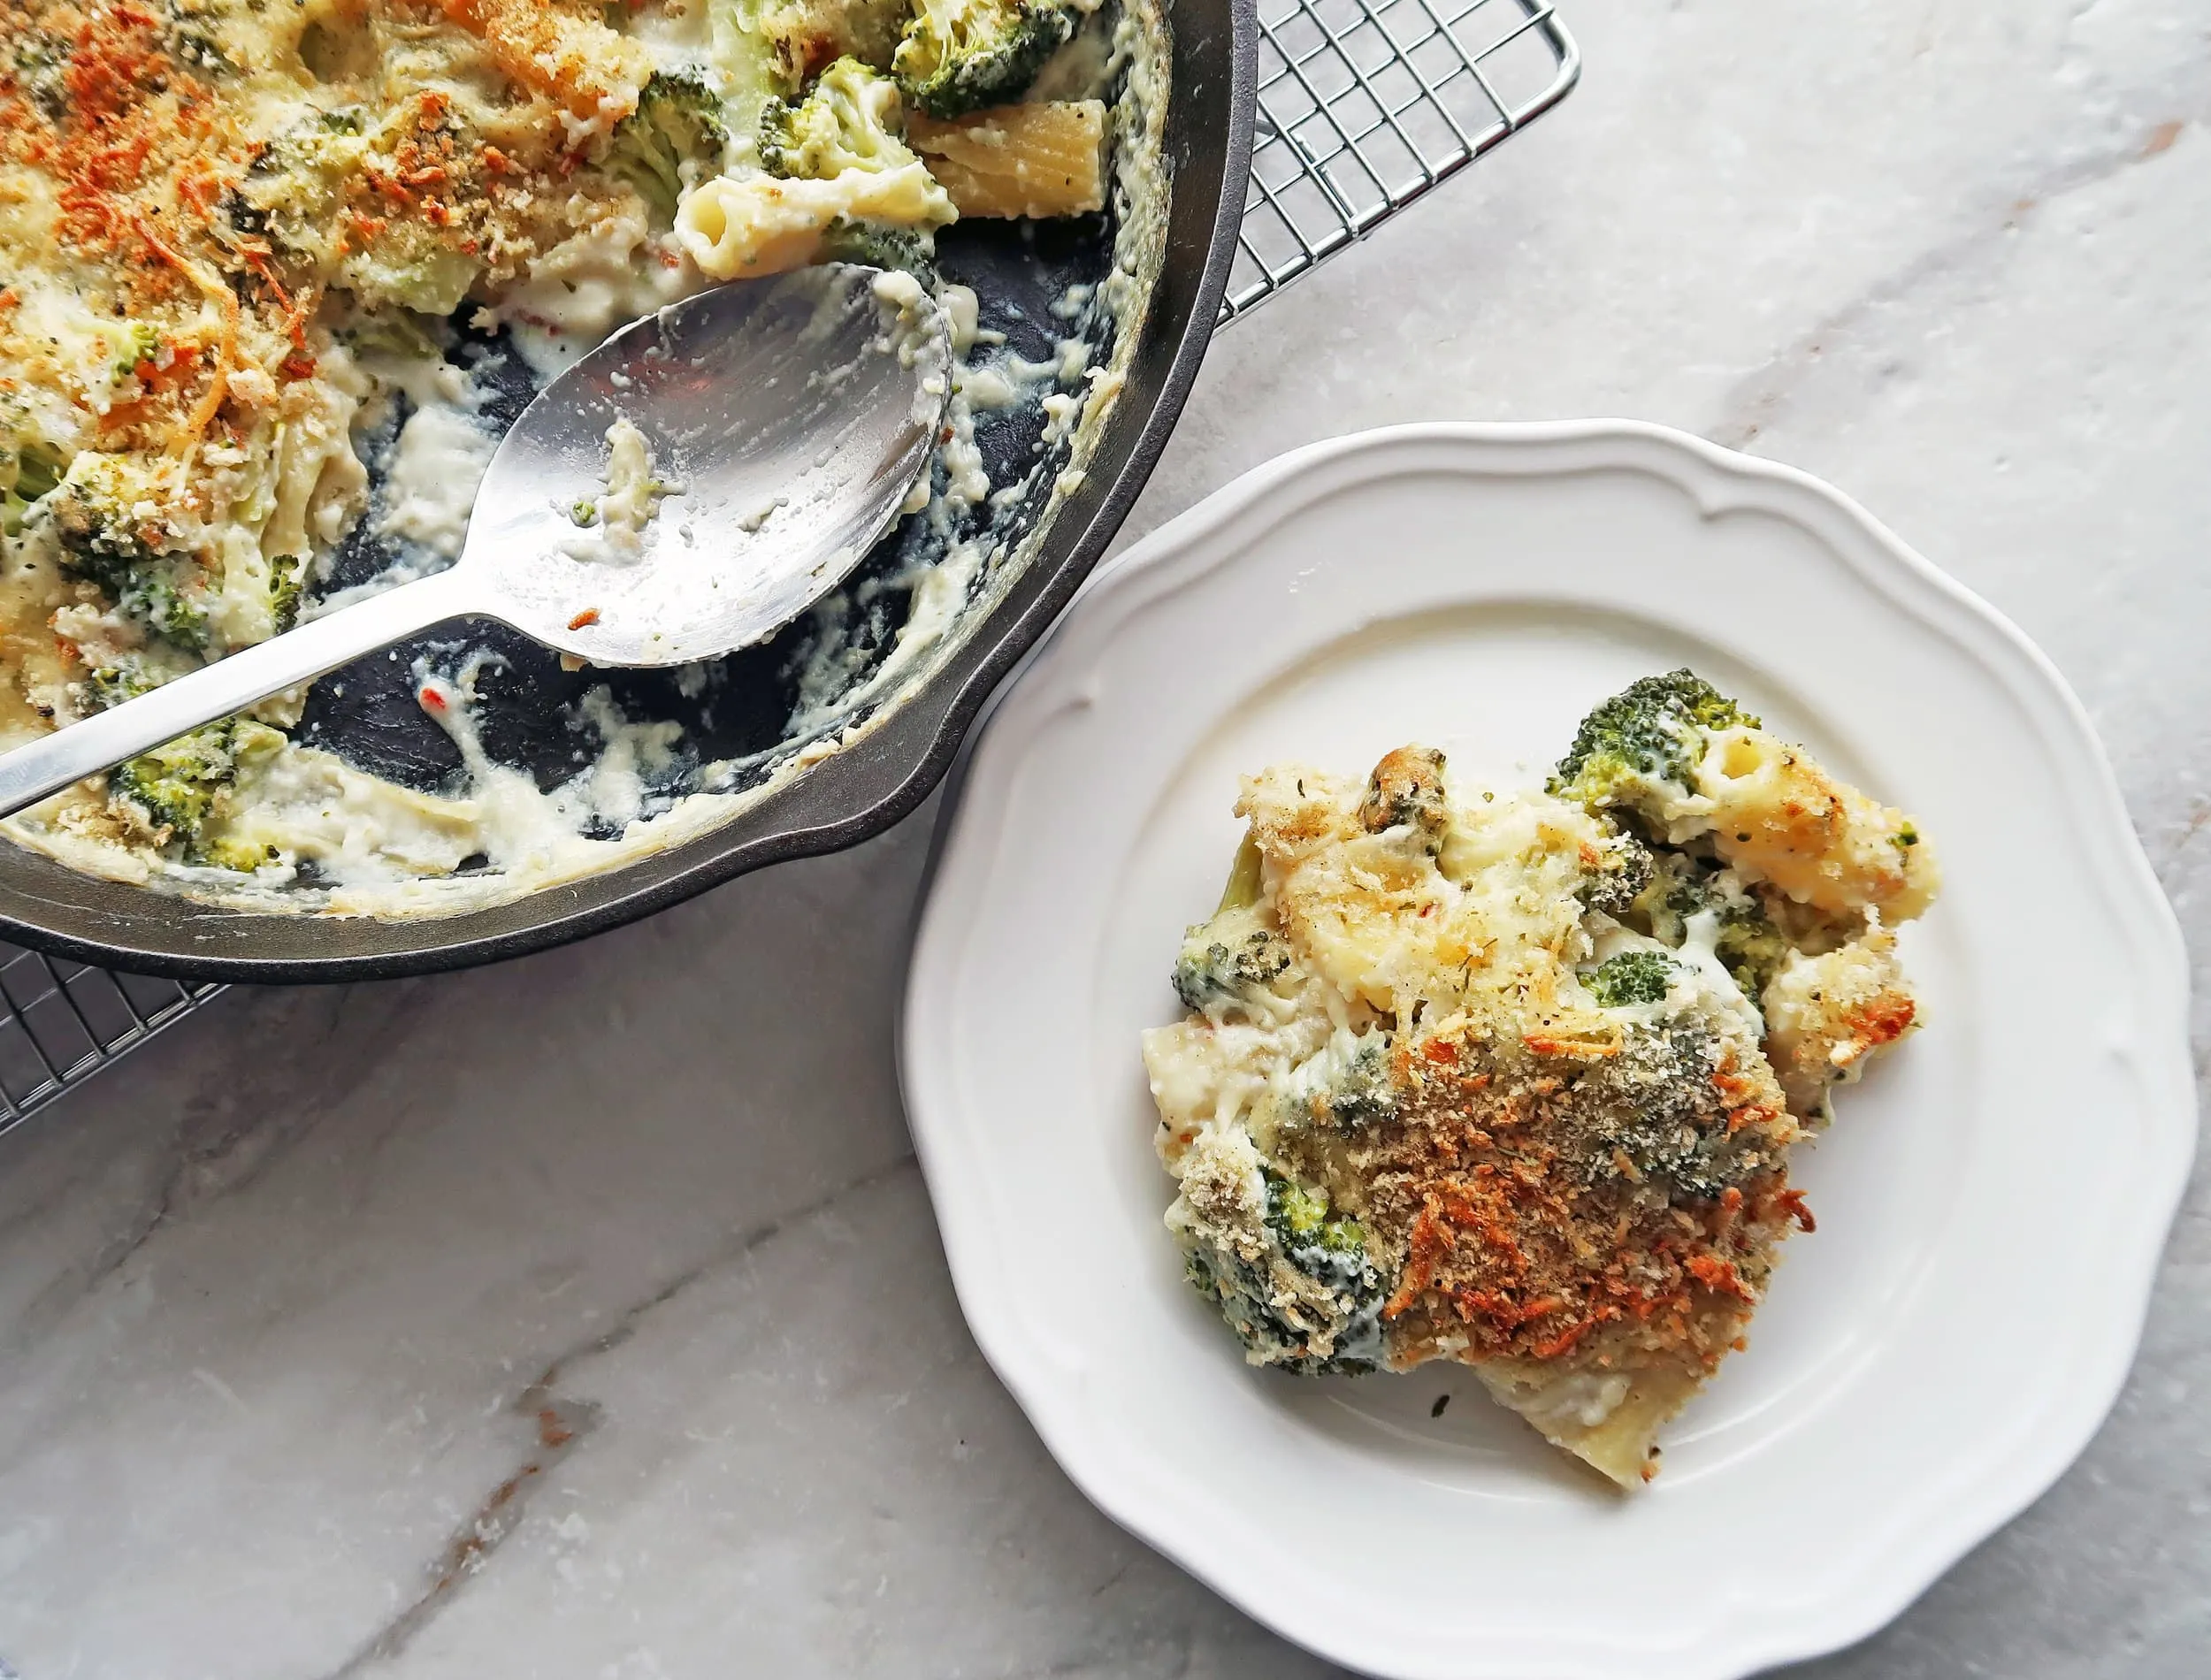 A plate of baked pasta with broccoli and white cheese sauce.